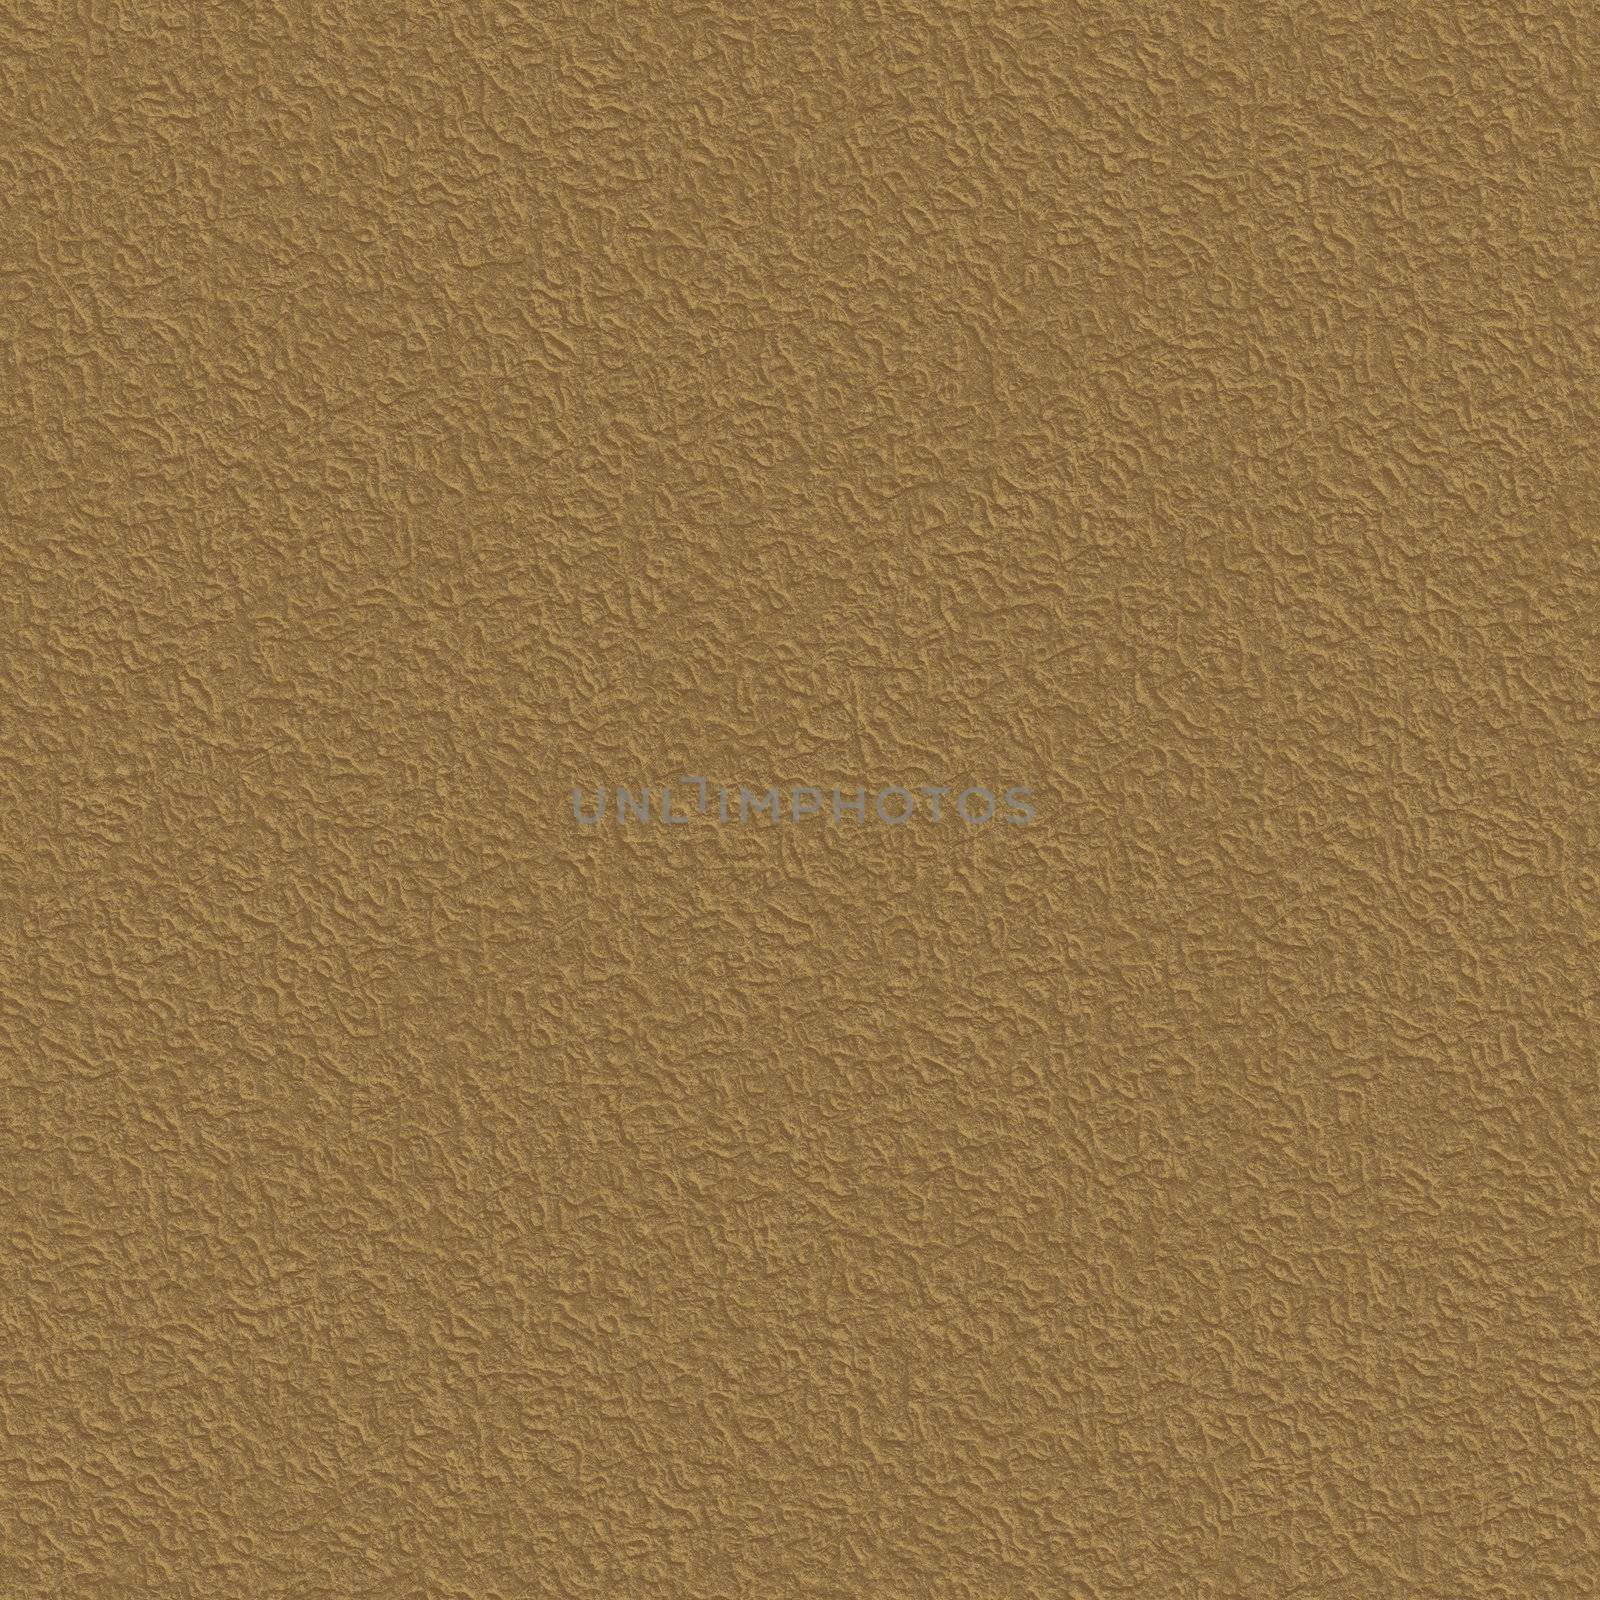 Stucco textured background, paper background, seamless